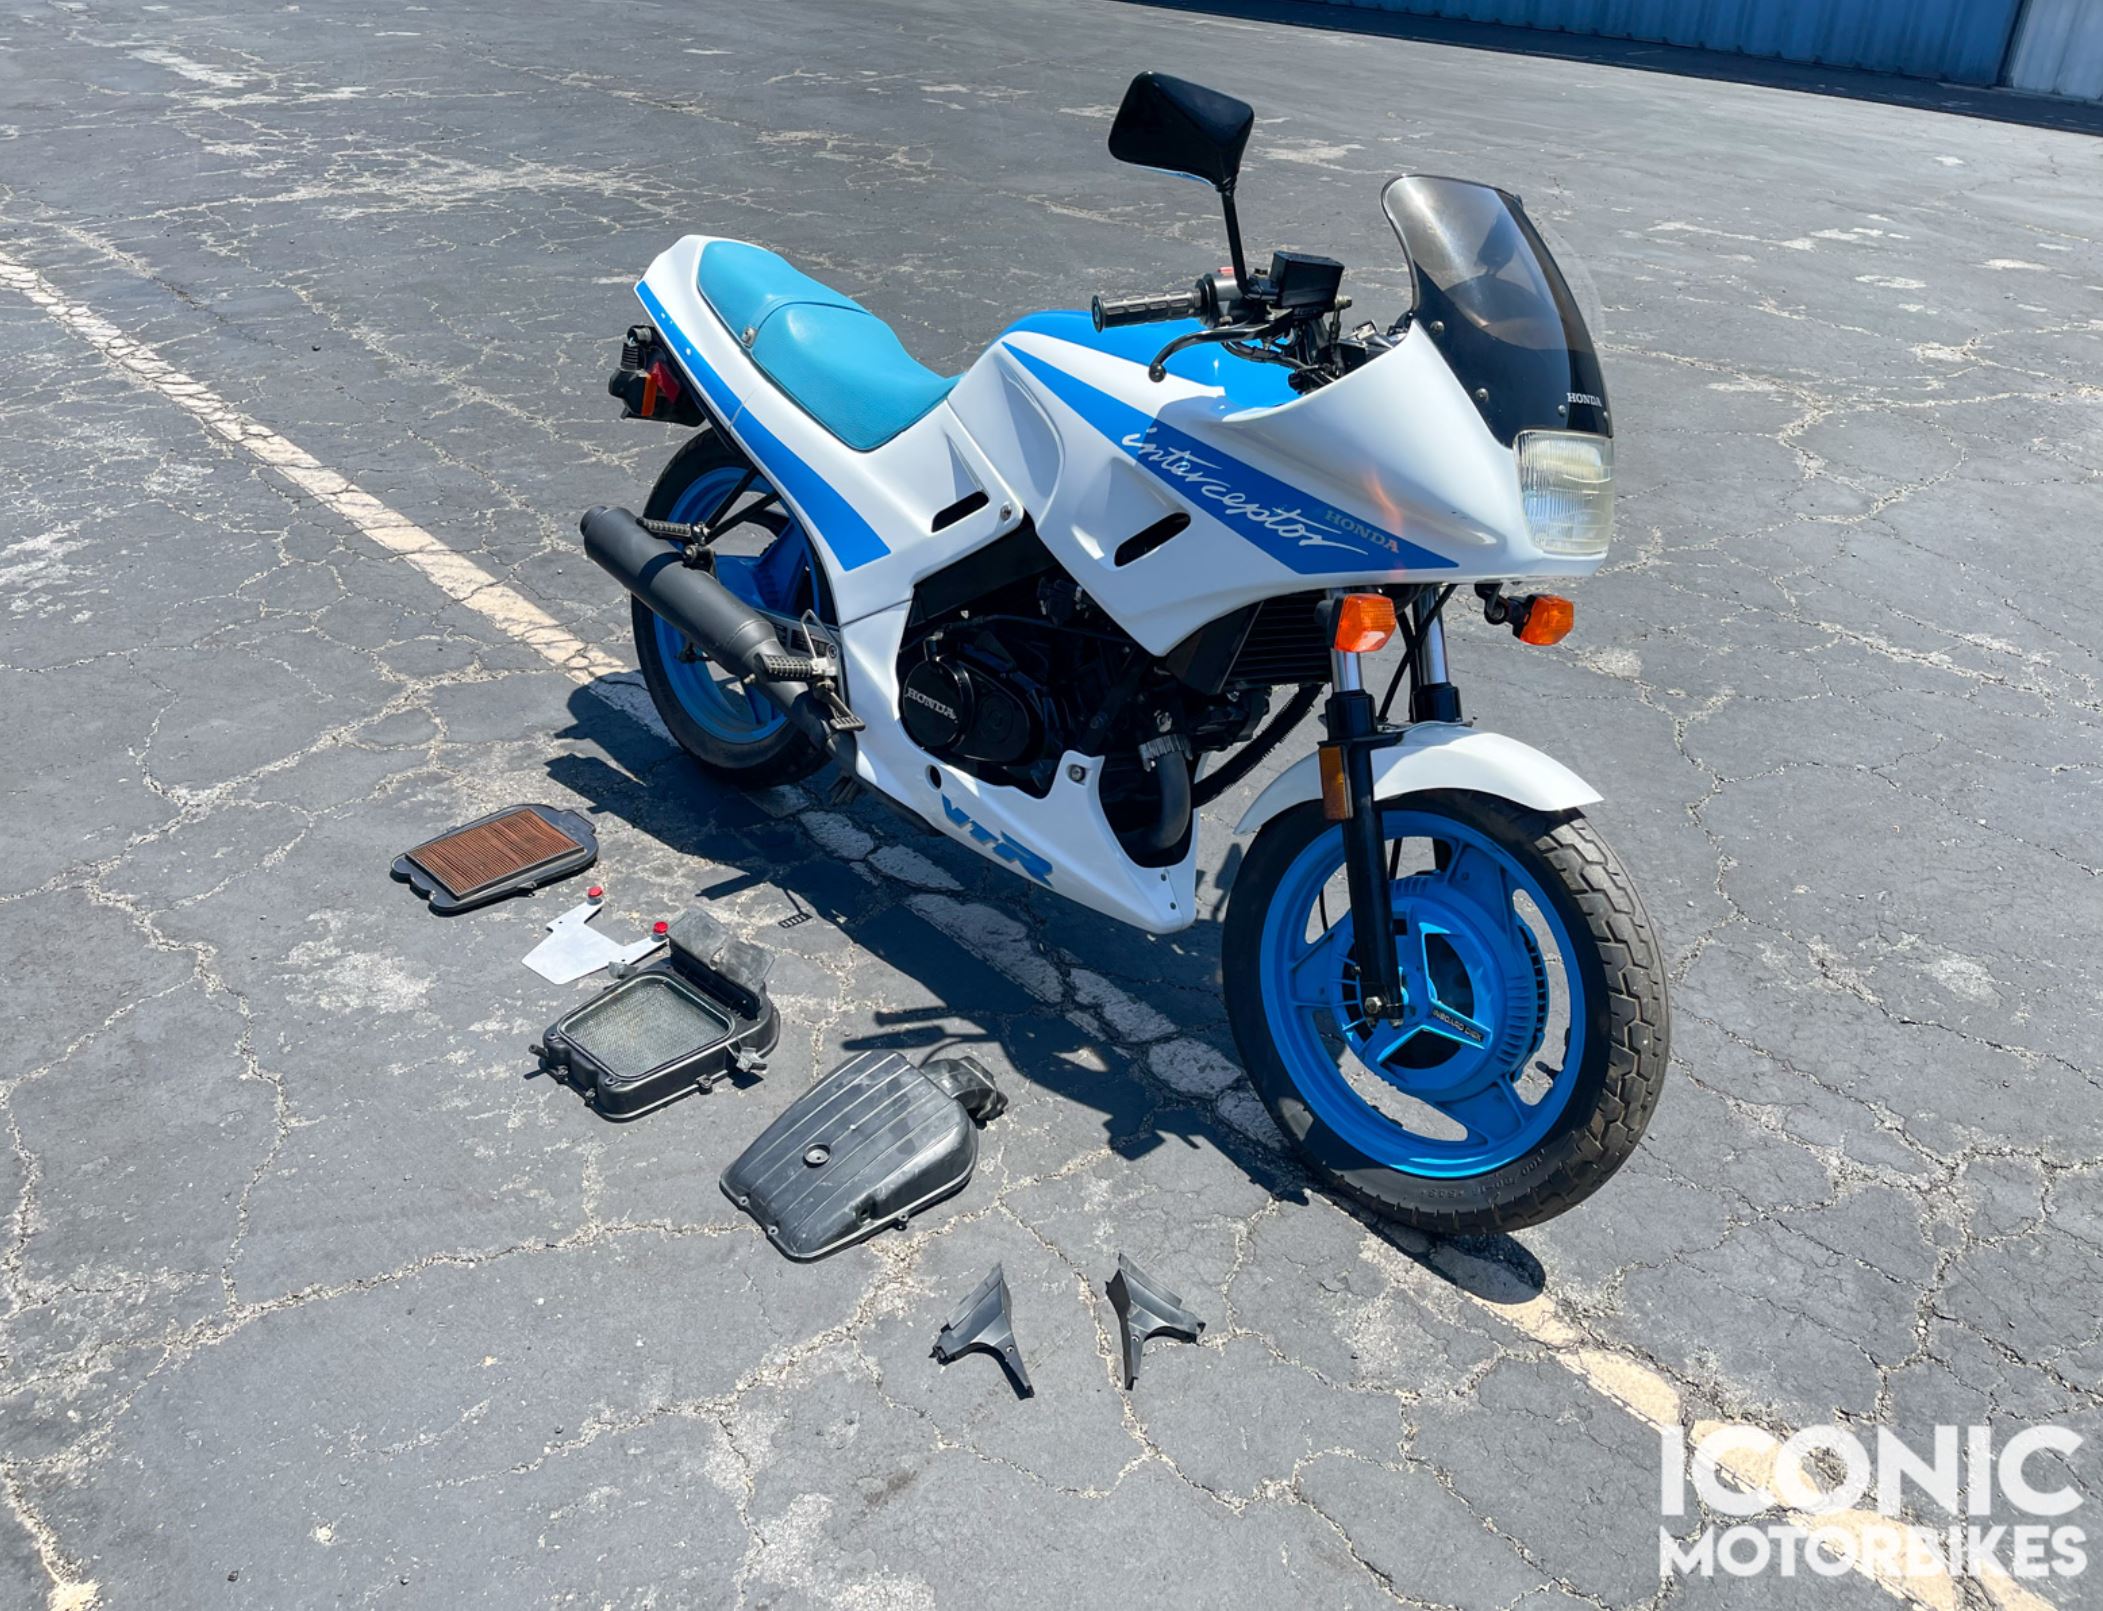 https://iconicmotorbikeauctions.com/wp-content/uploads/2021/07/Honda-VTR250-Front-Right-Featured.jpg